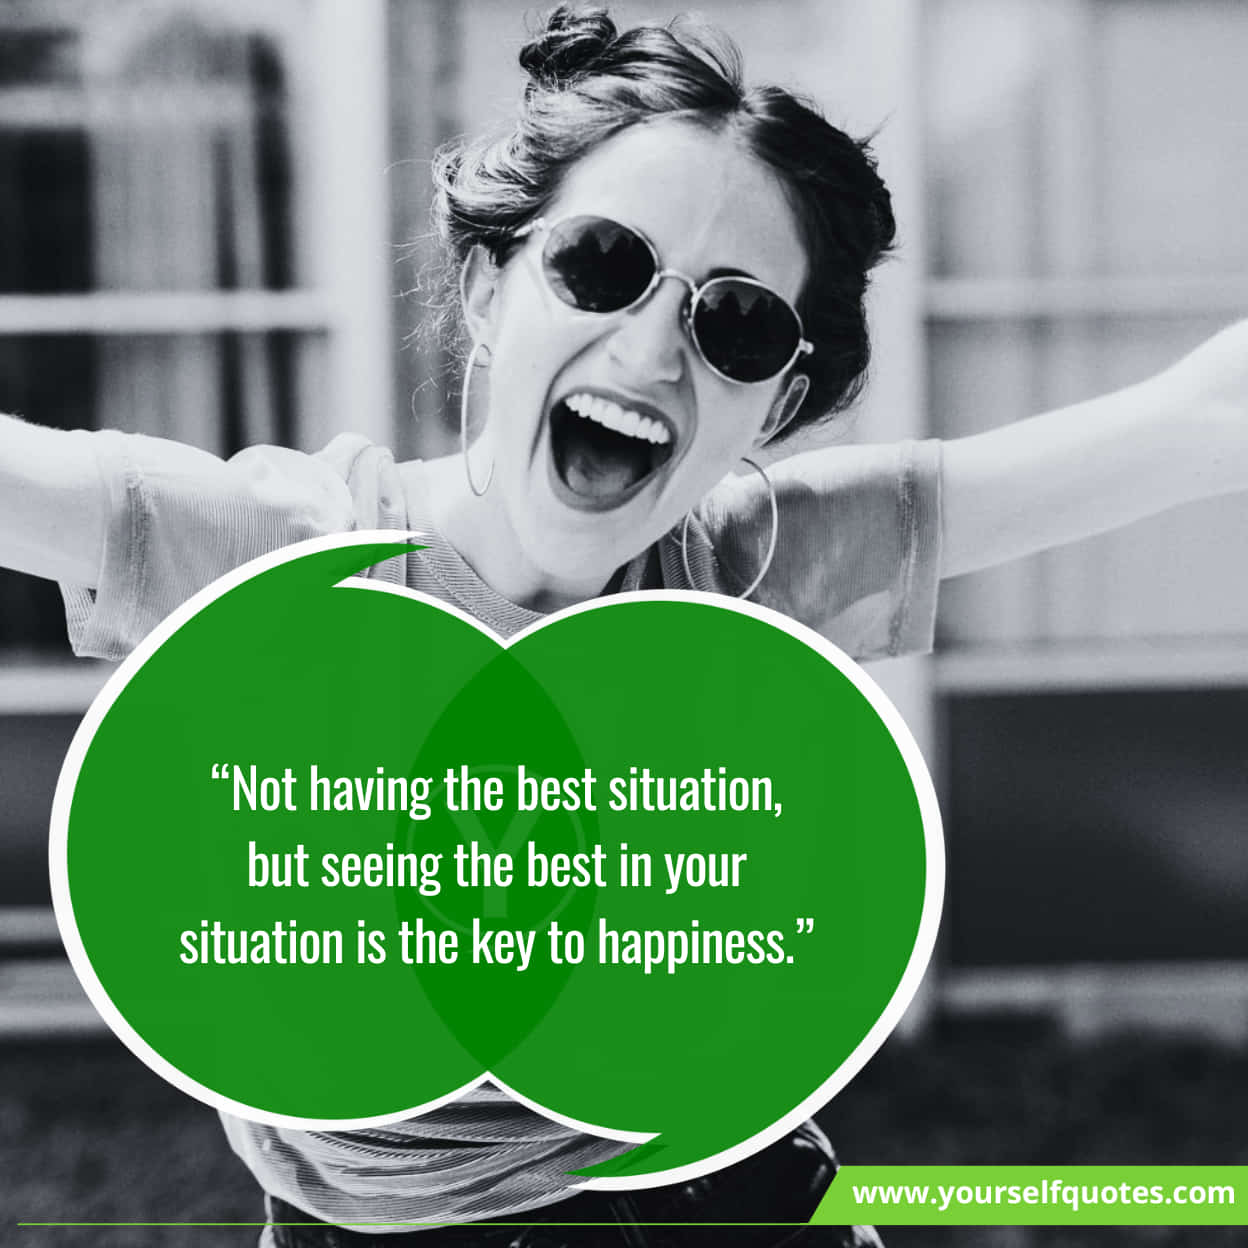 Popular Motivational Quotes On Happiness